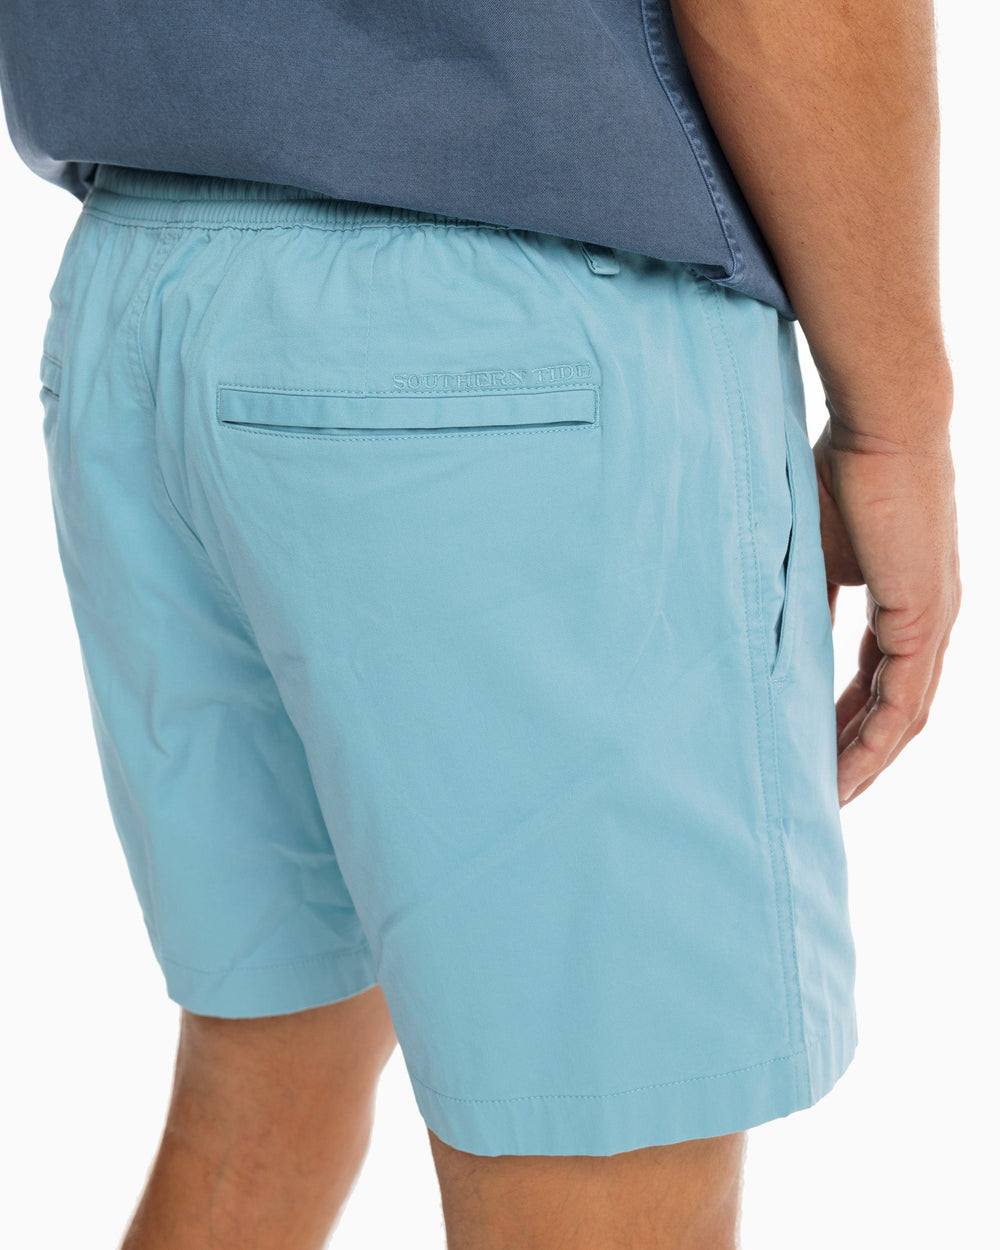 The model pocket view of the Sun Farer 6 inch short - Ocean Teal